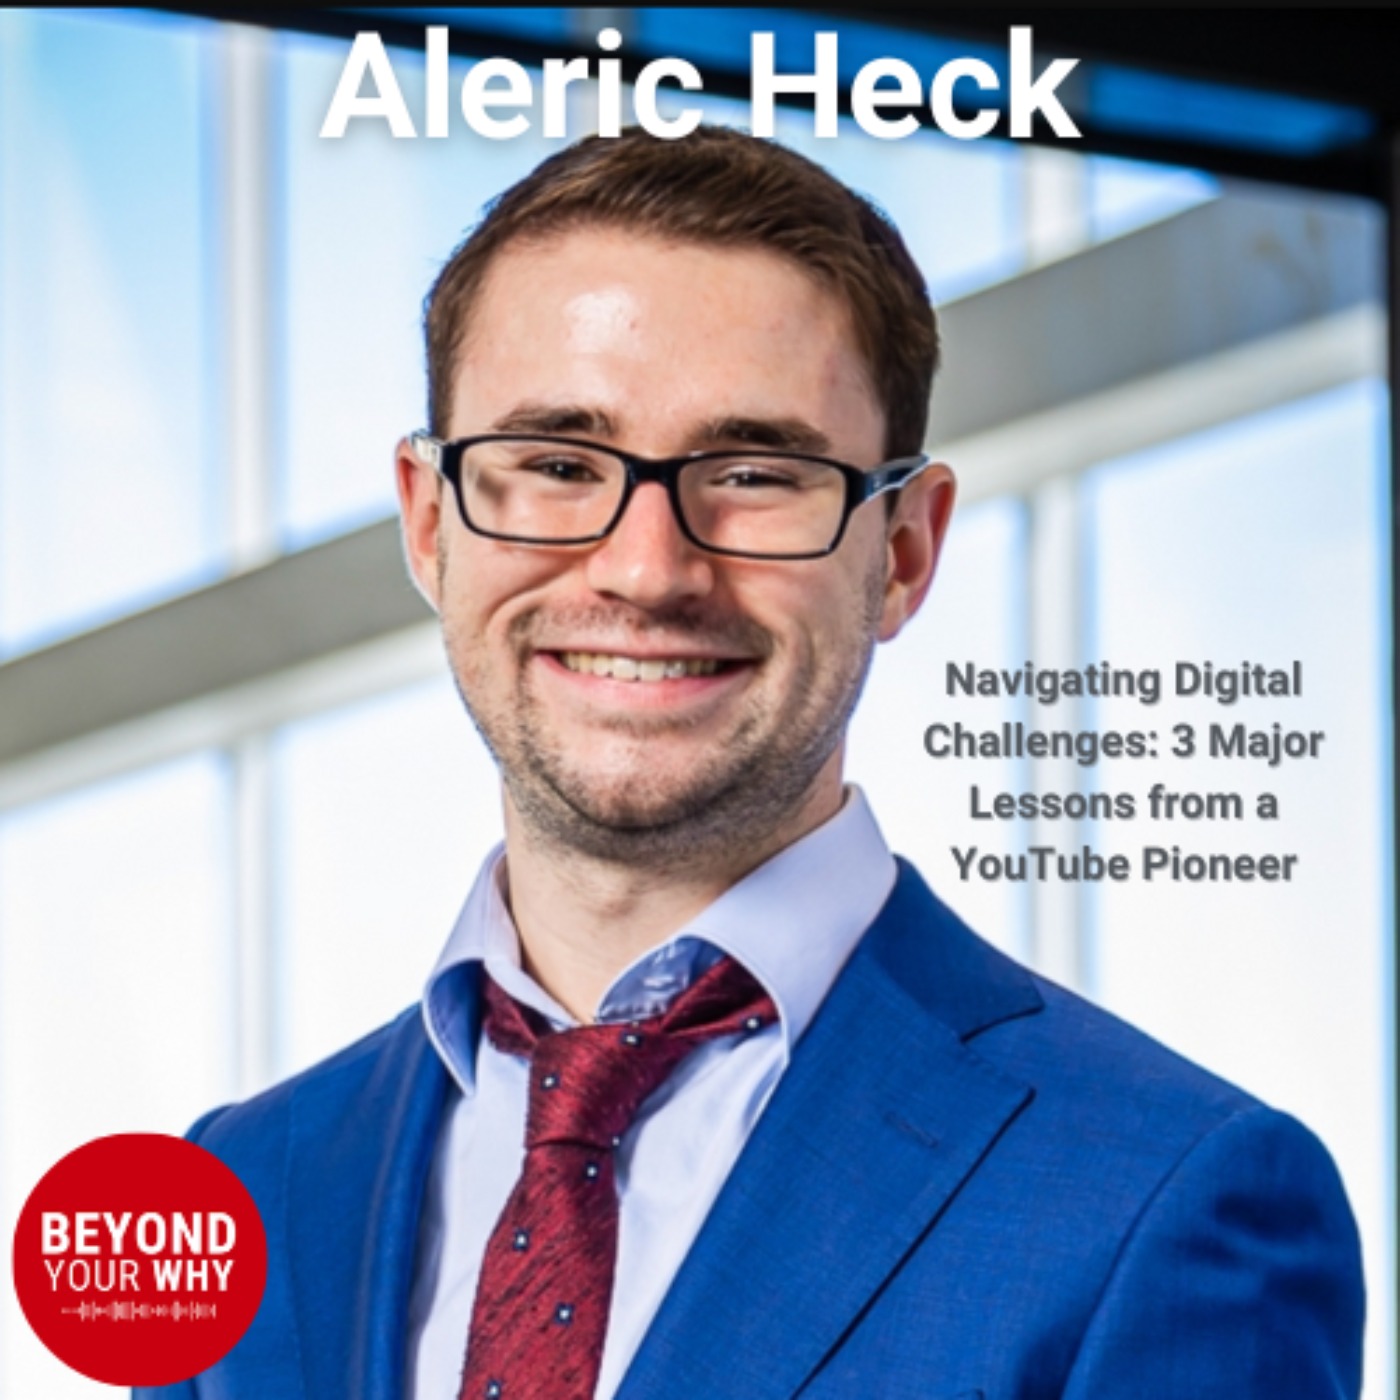 Navigating Digital Challenges: 3 Major Lessons from a YouTube Pioneer, Aleric Heck